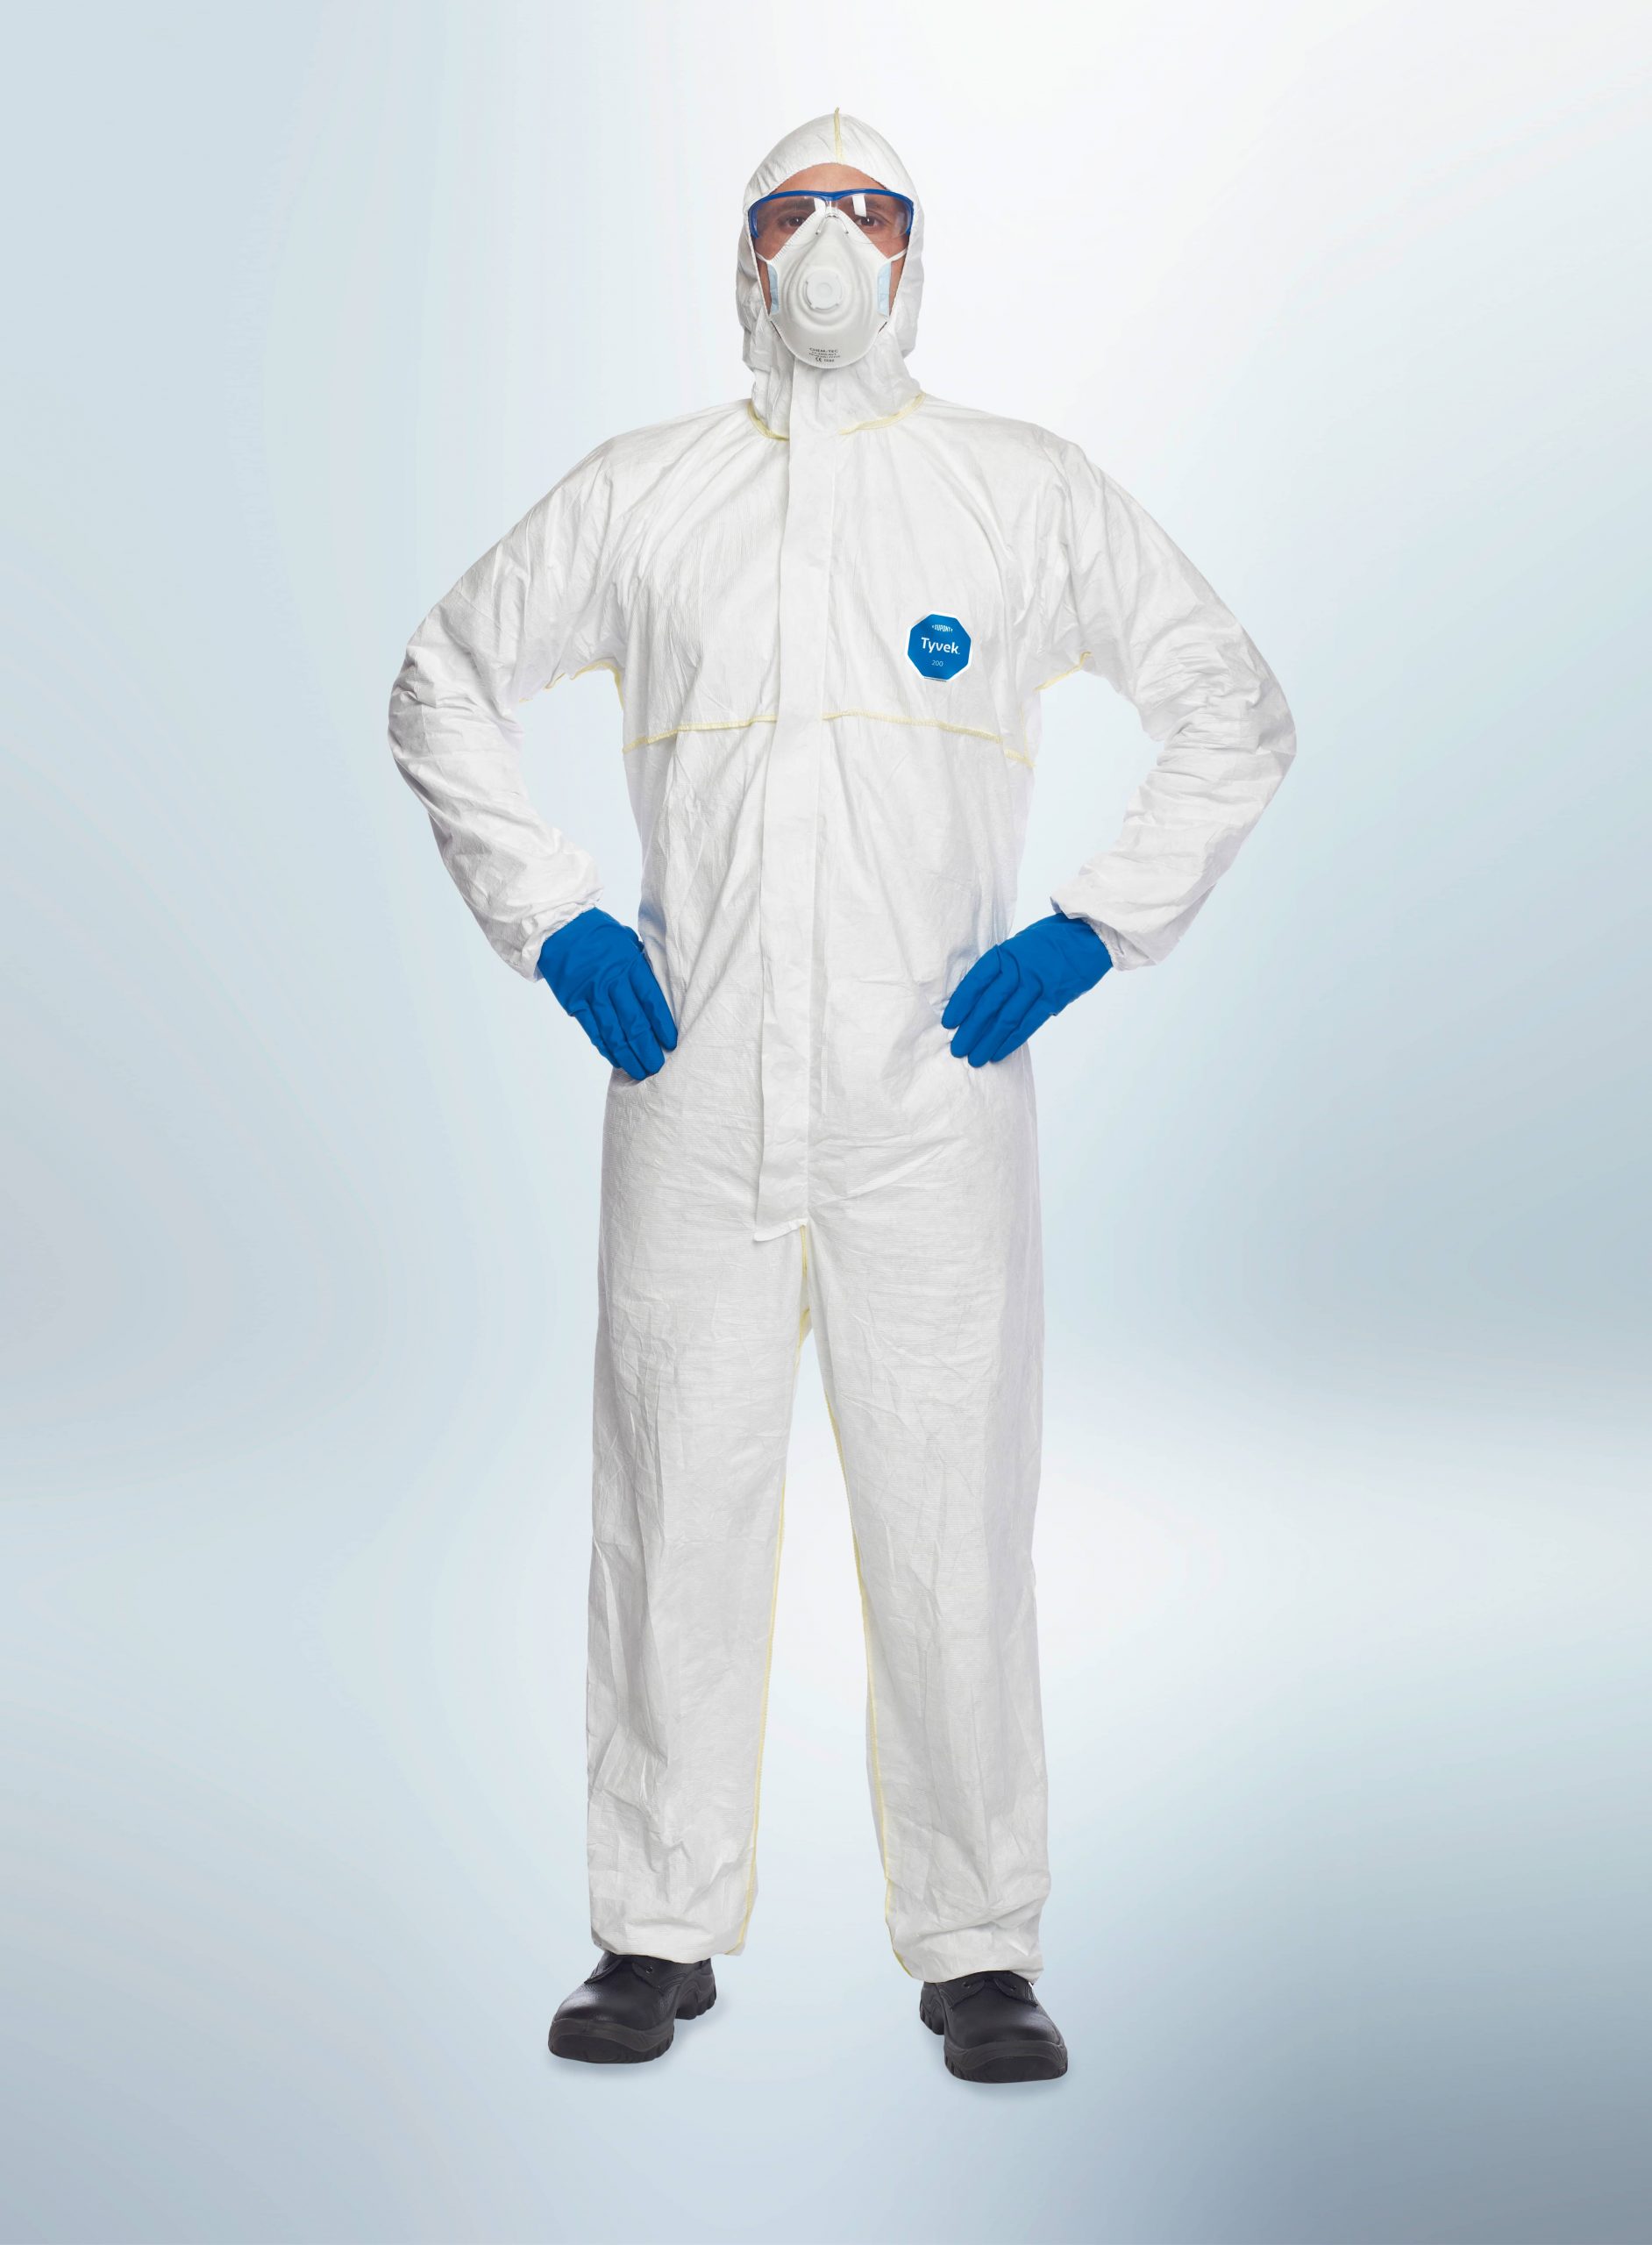 SKAN Overall protective work outfit for contamination control in clean room